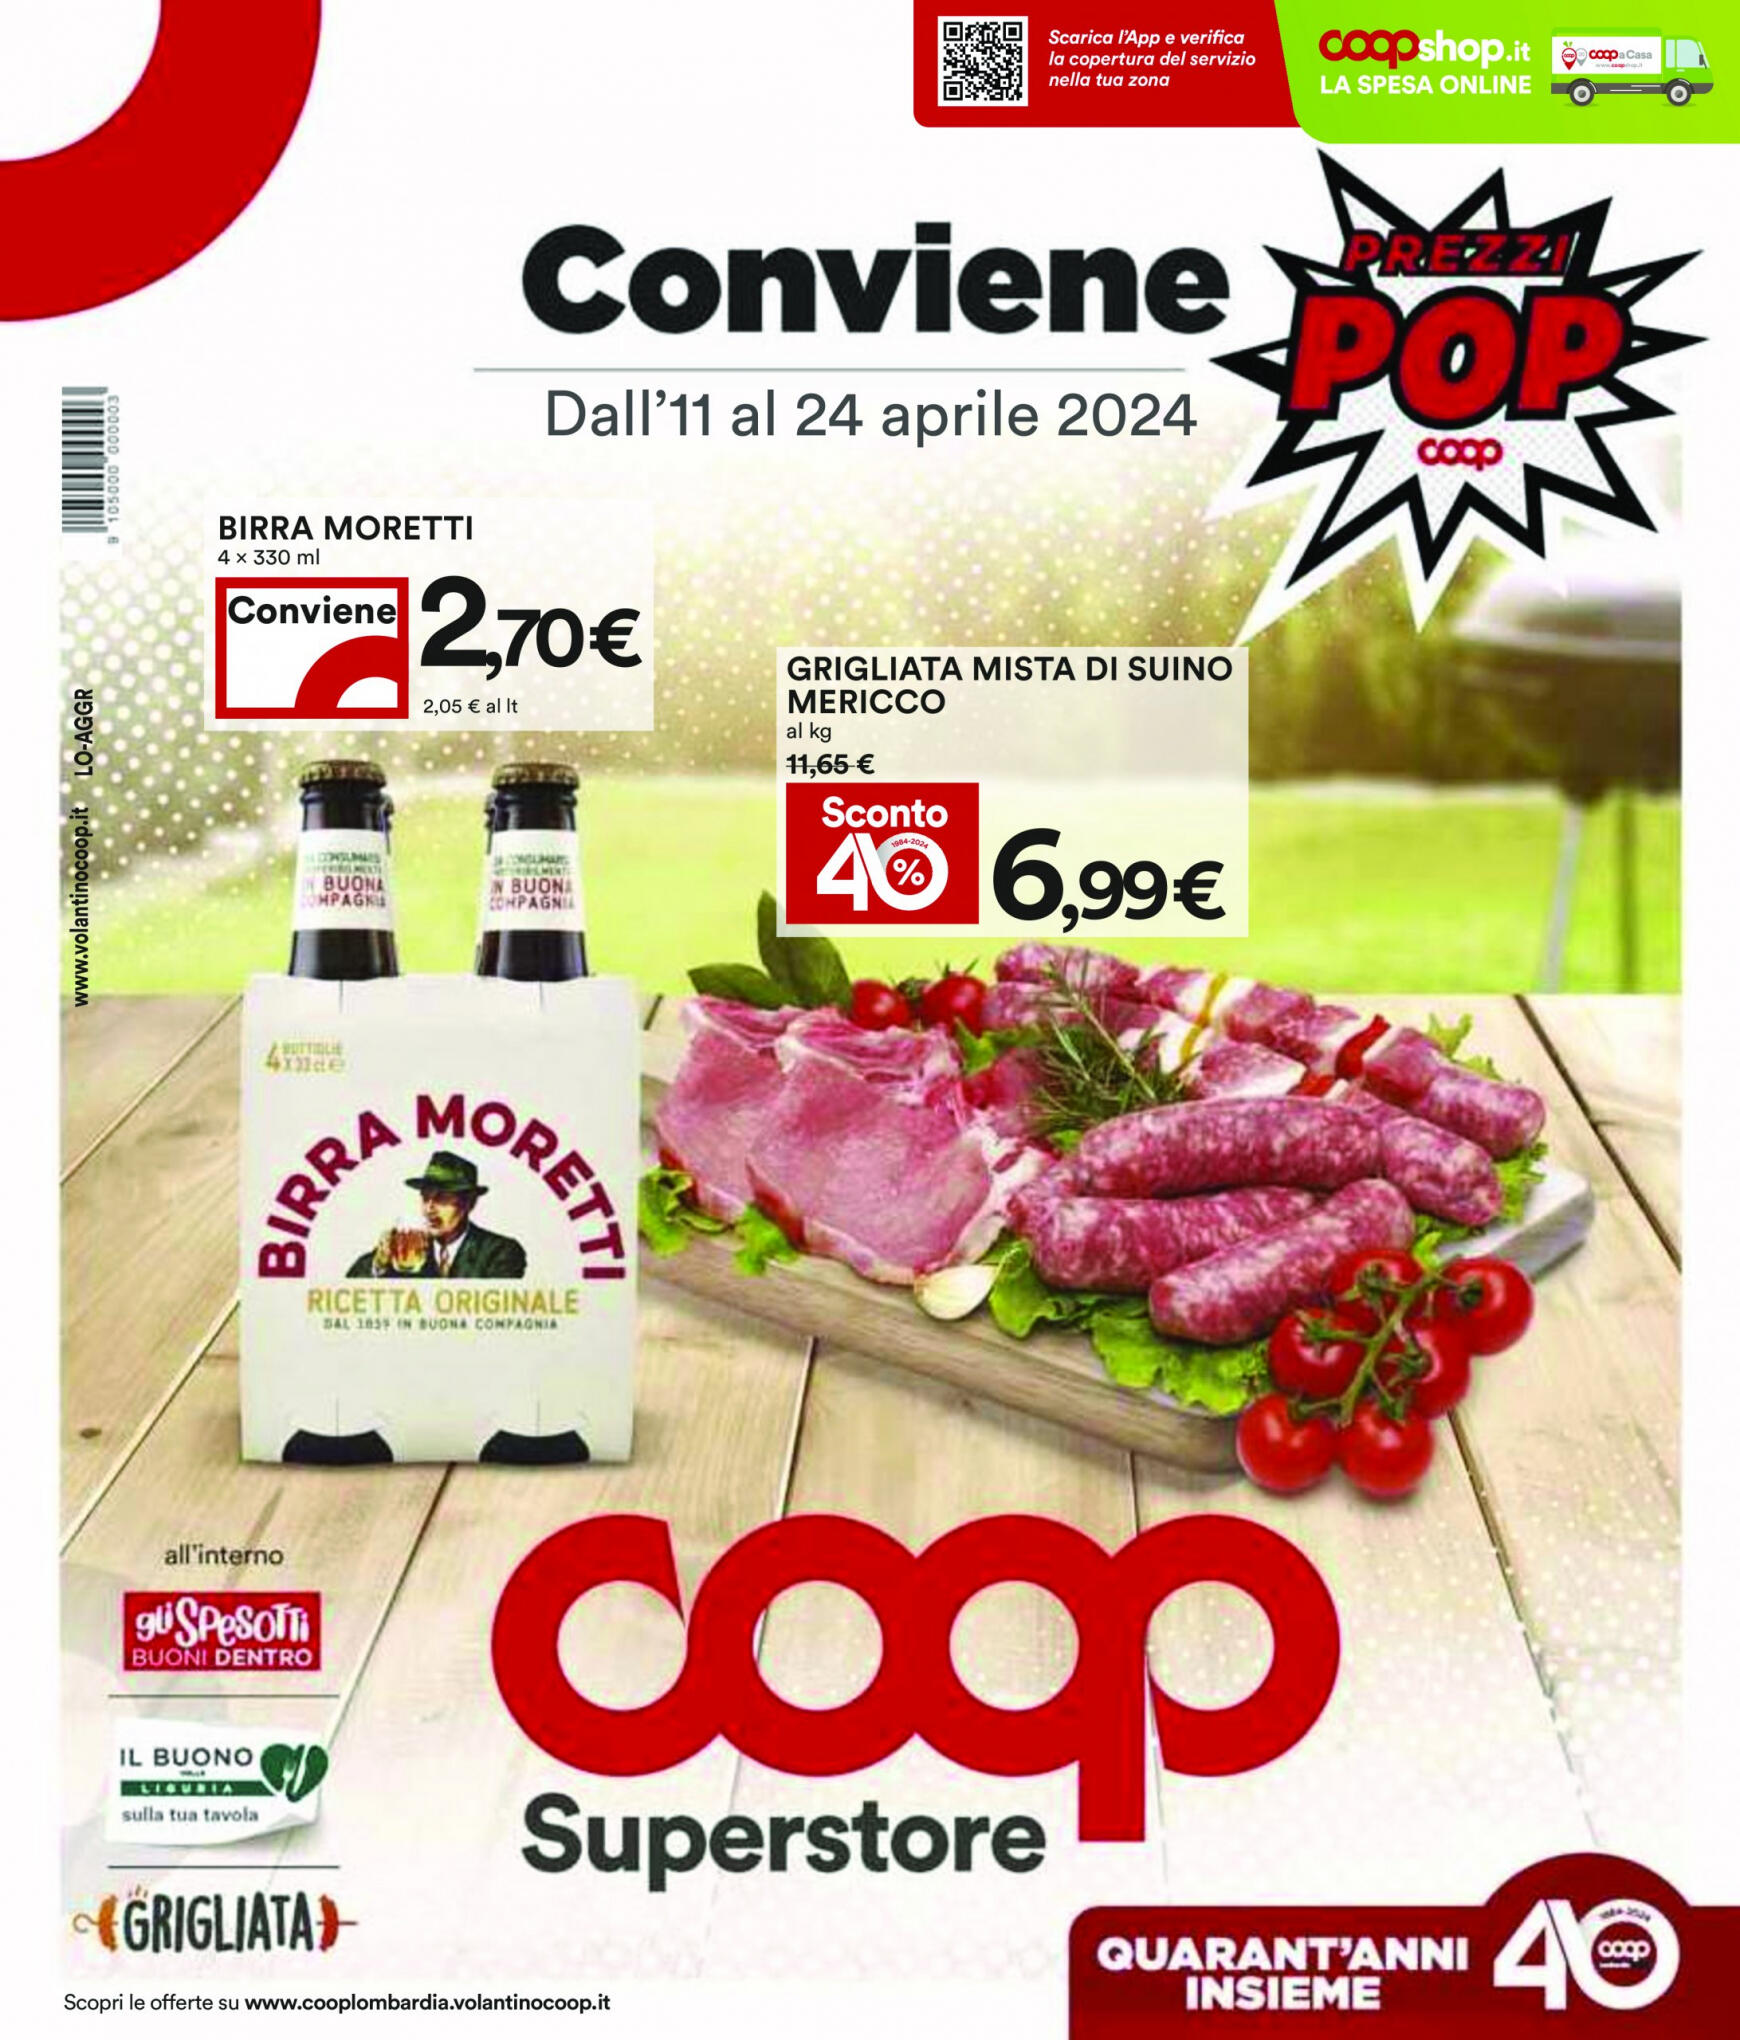 coop - Nuovo volantino Coop 11.04. - 24.04. - page: 1